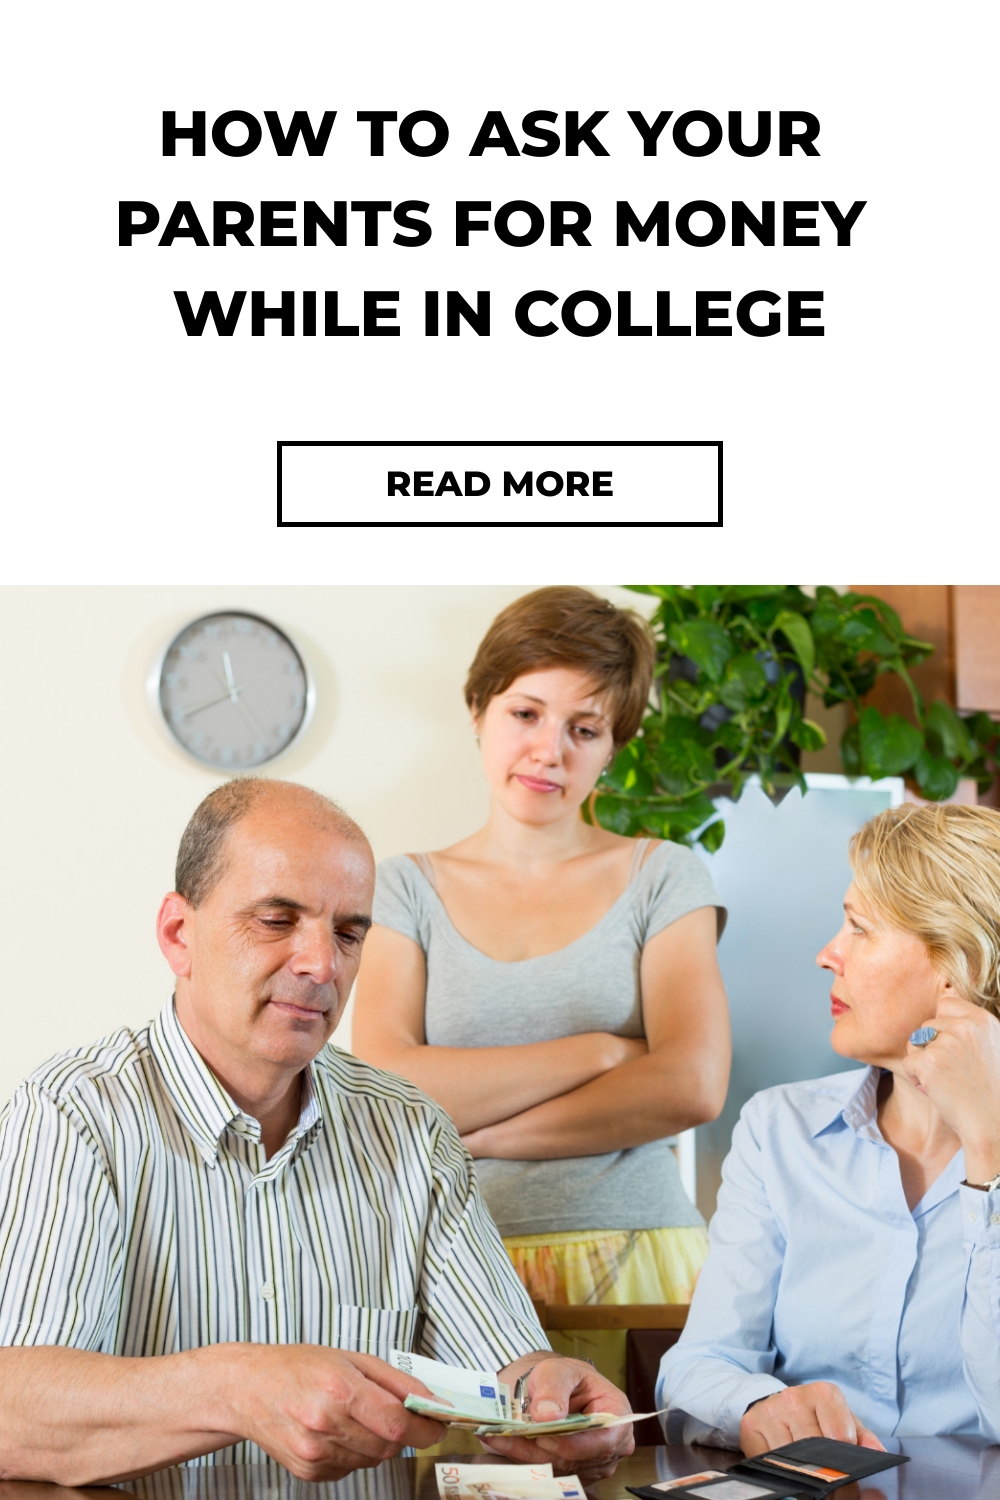 How To Ask Your Parents For Money While In College